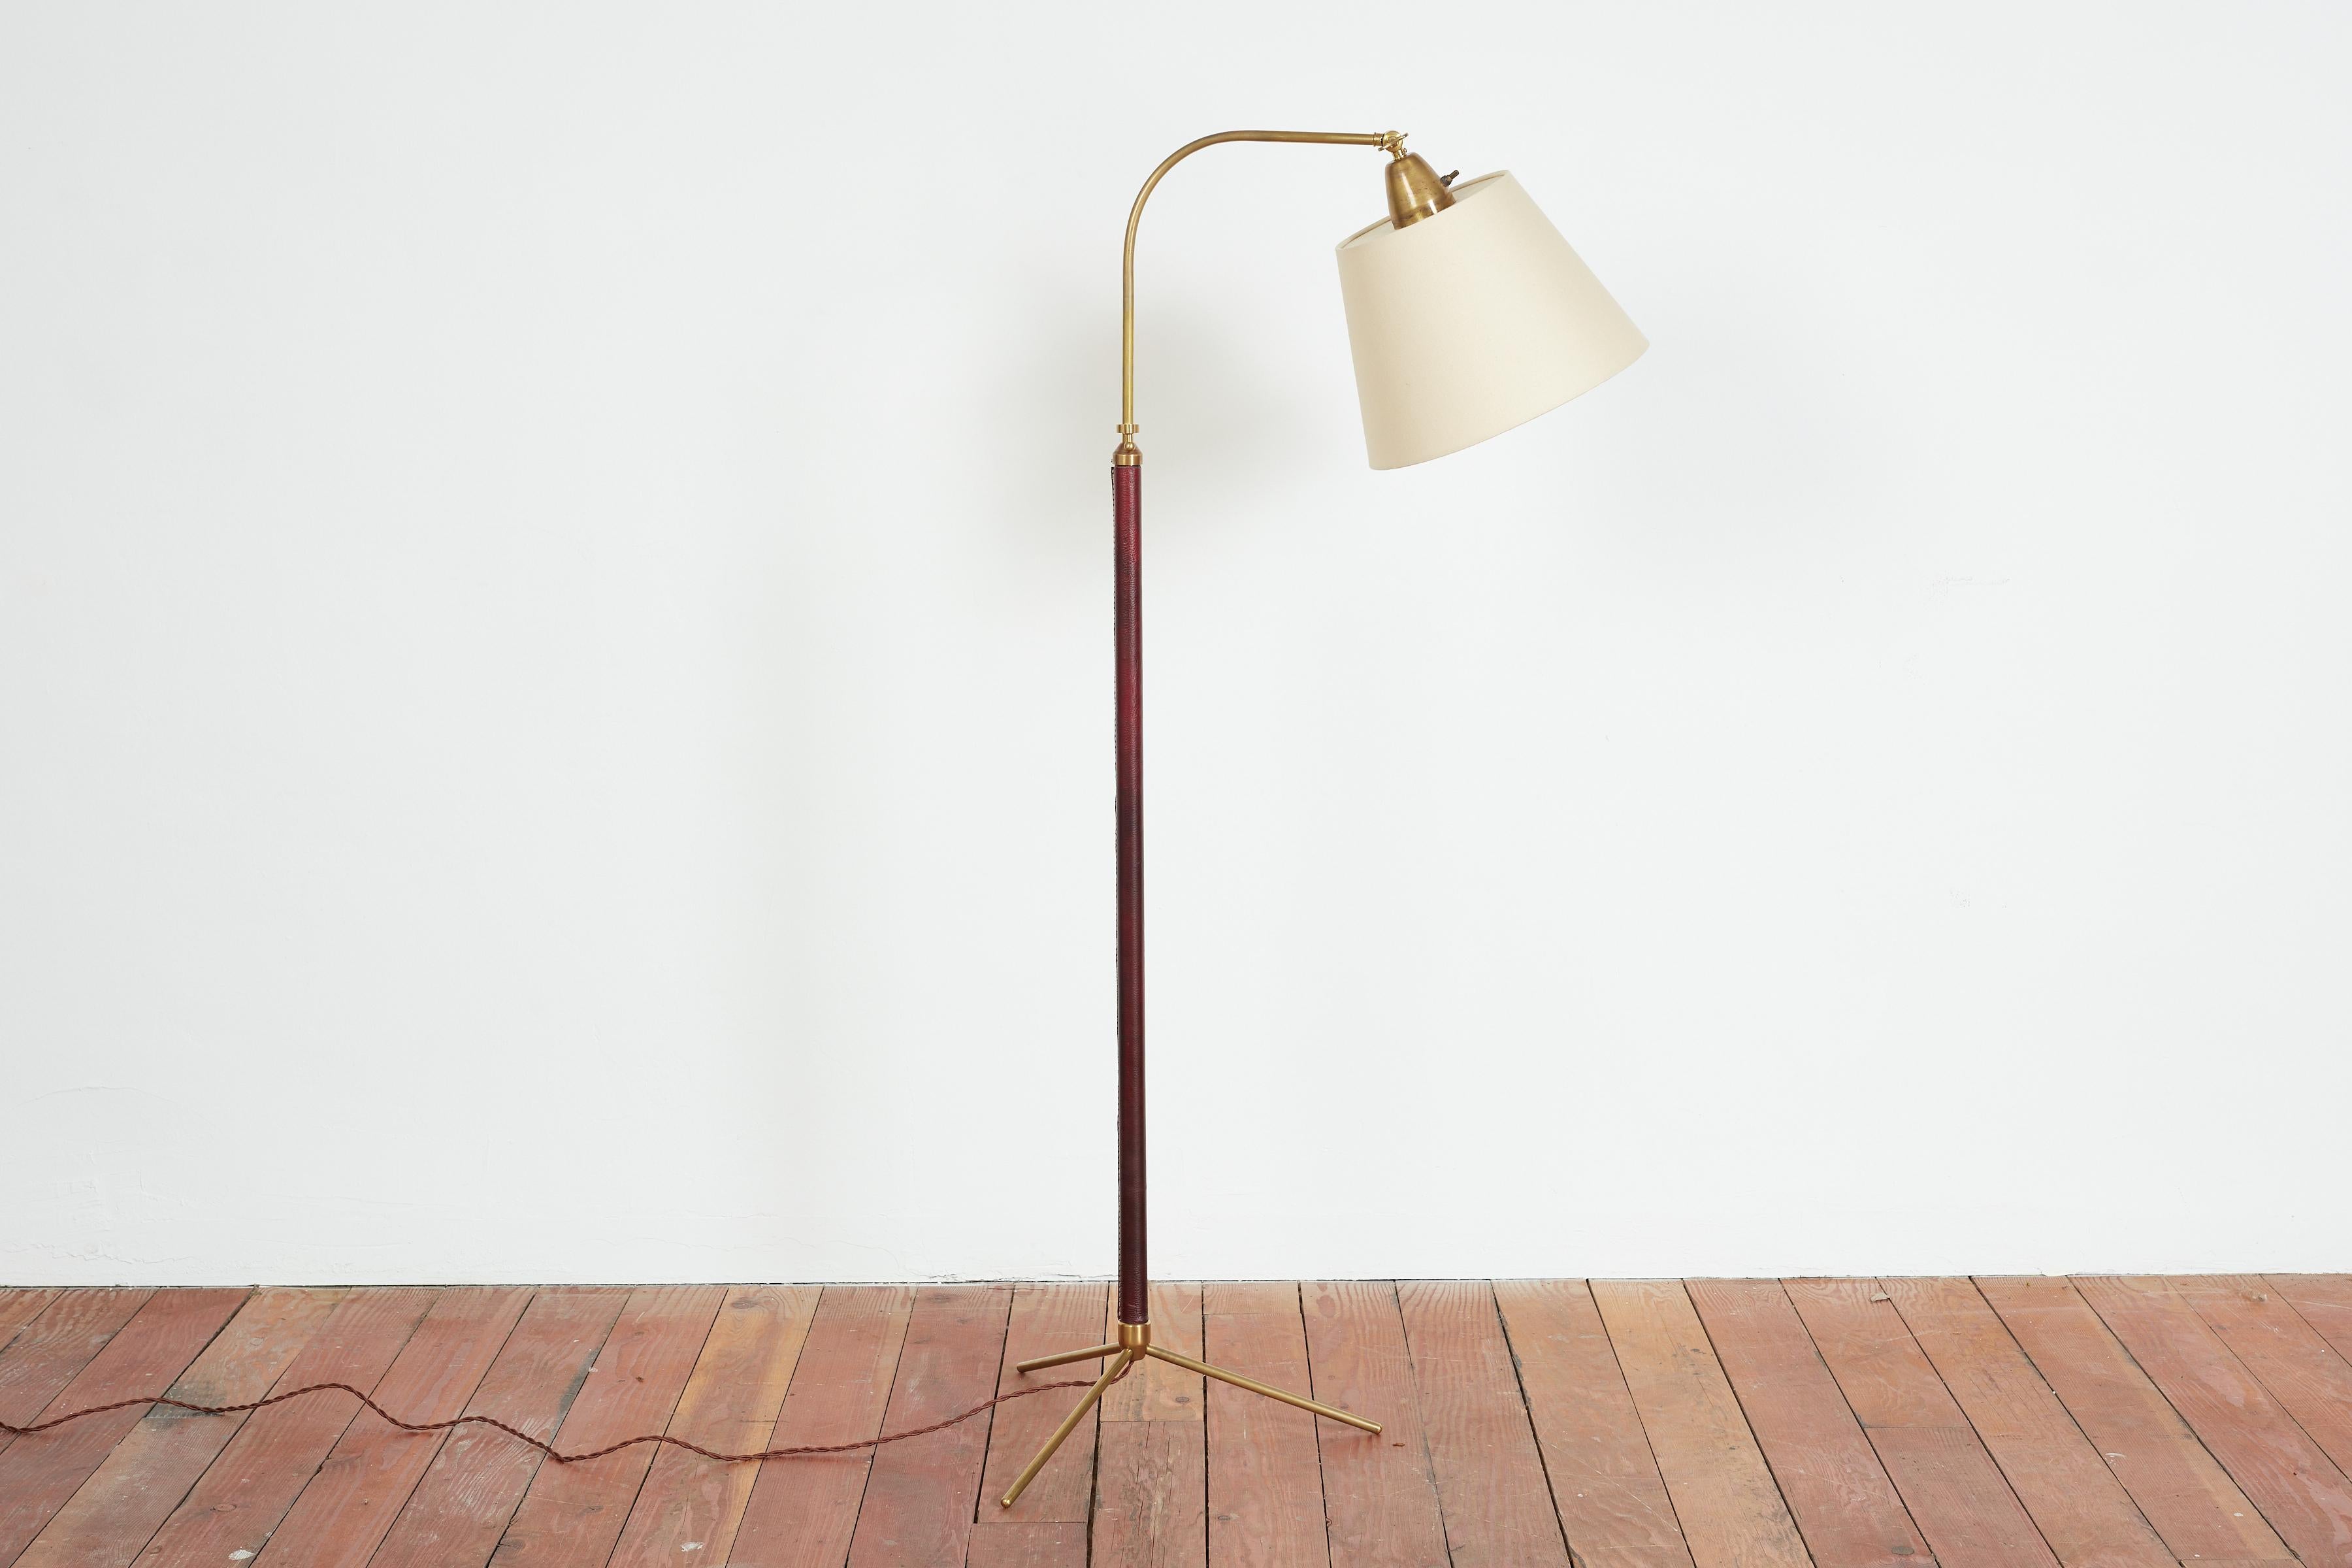 Handsome French floor lamp by Jacques Adnet with hand-stitched burgundy leather, contrast stitching, brass tripod base and new silk shade. 

Newly rewired. Height extends from 48” - 64.5”.